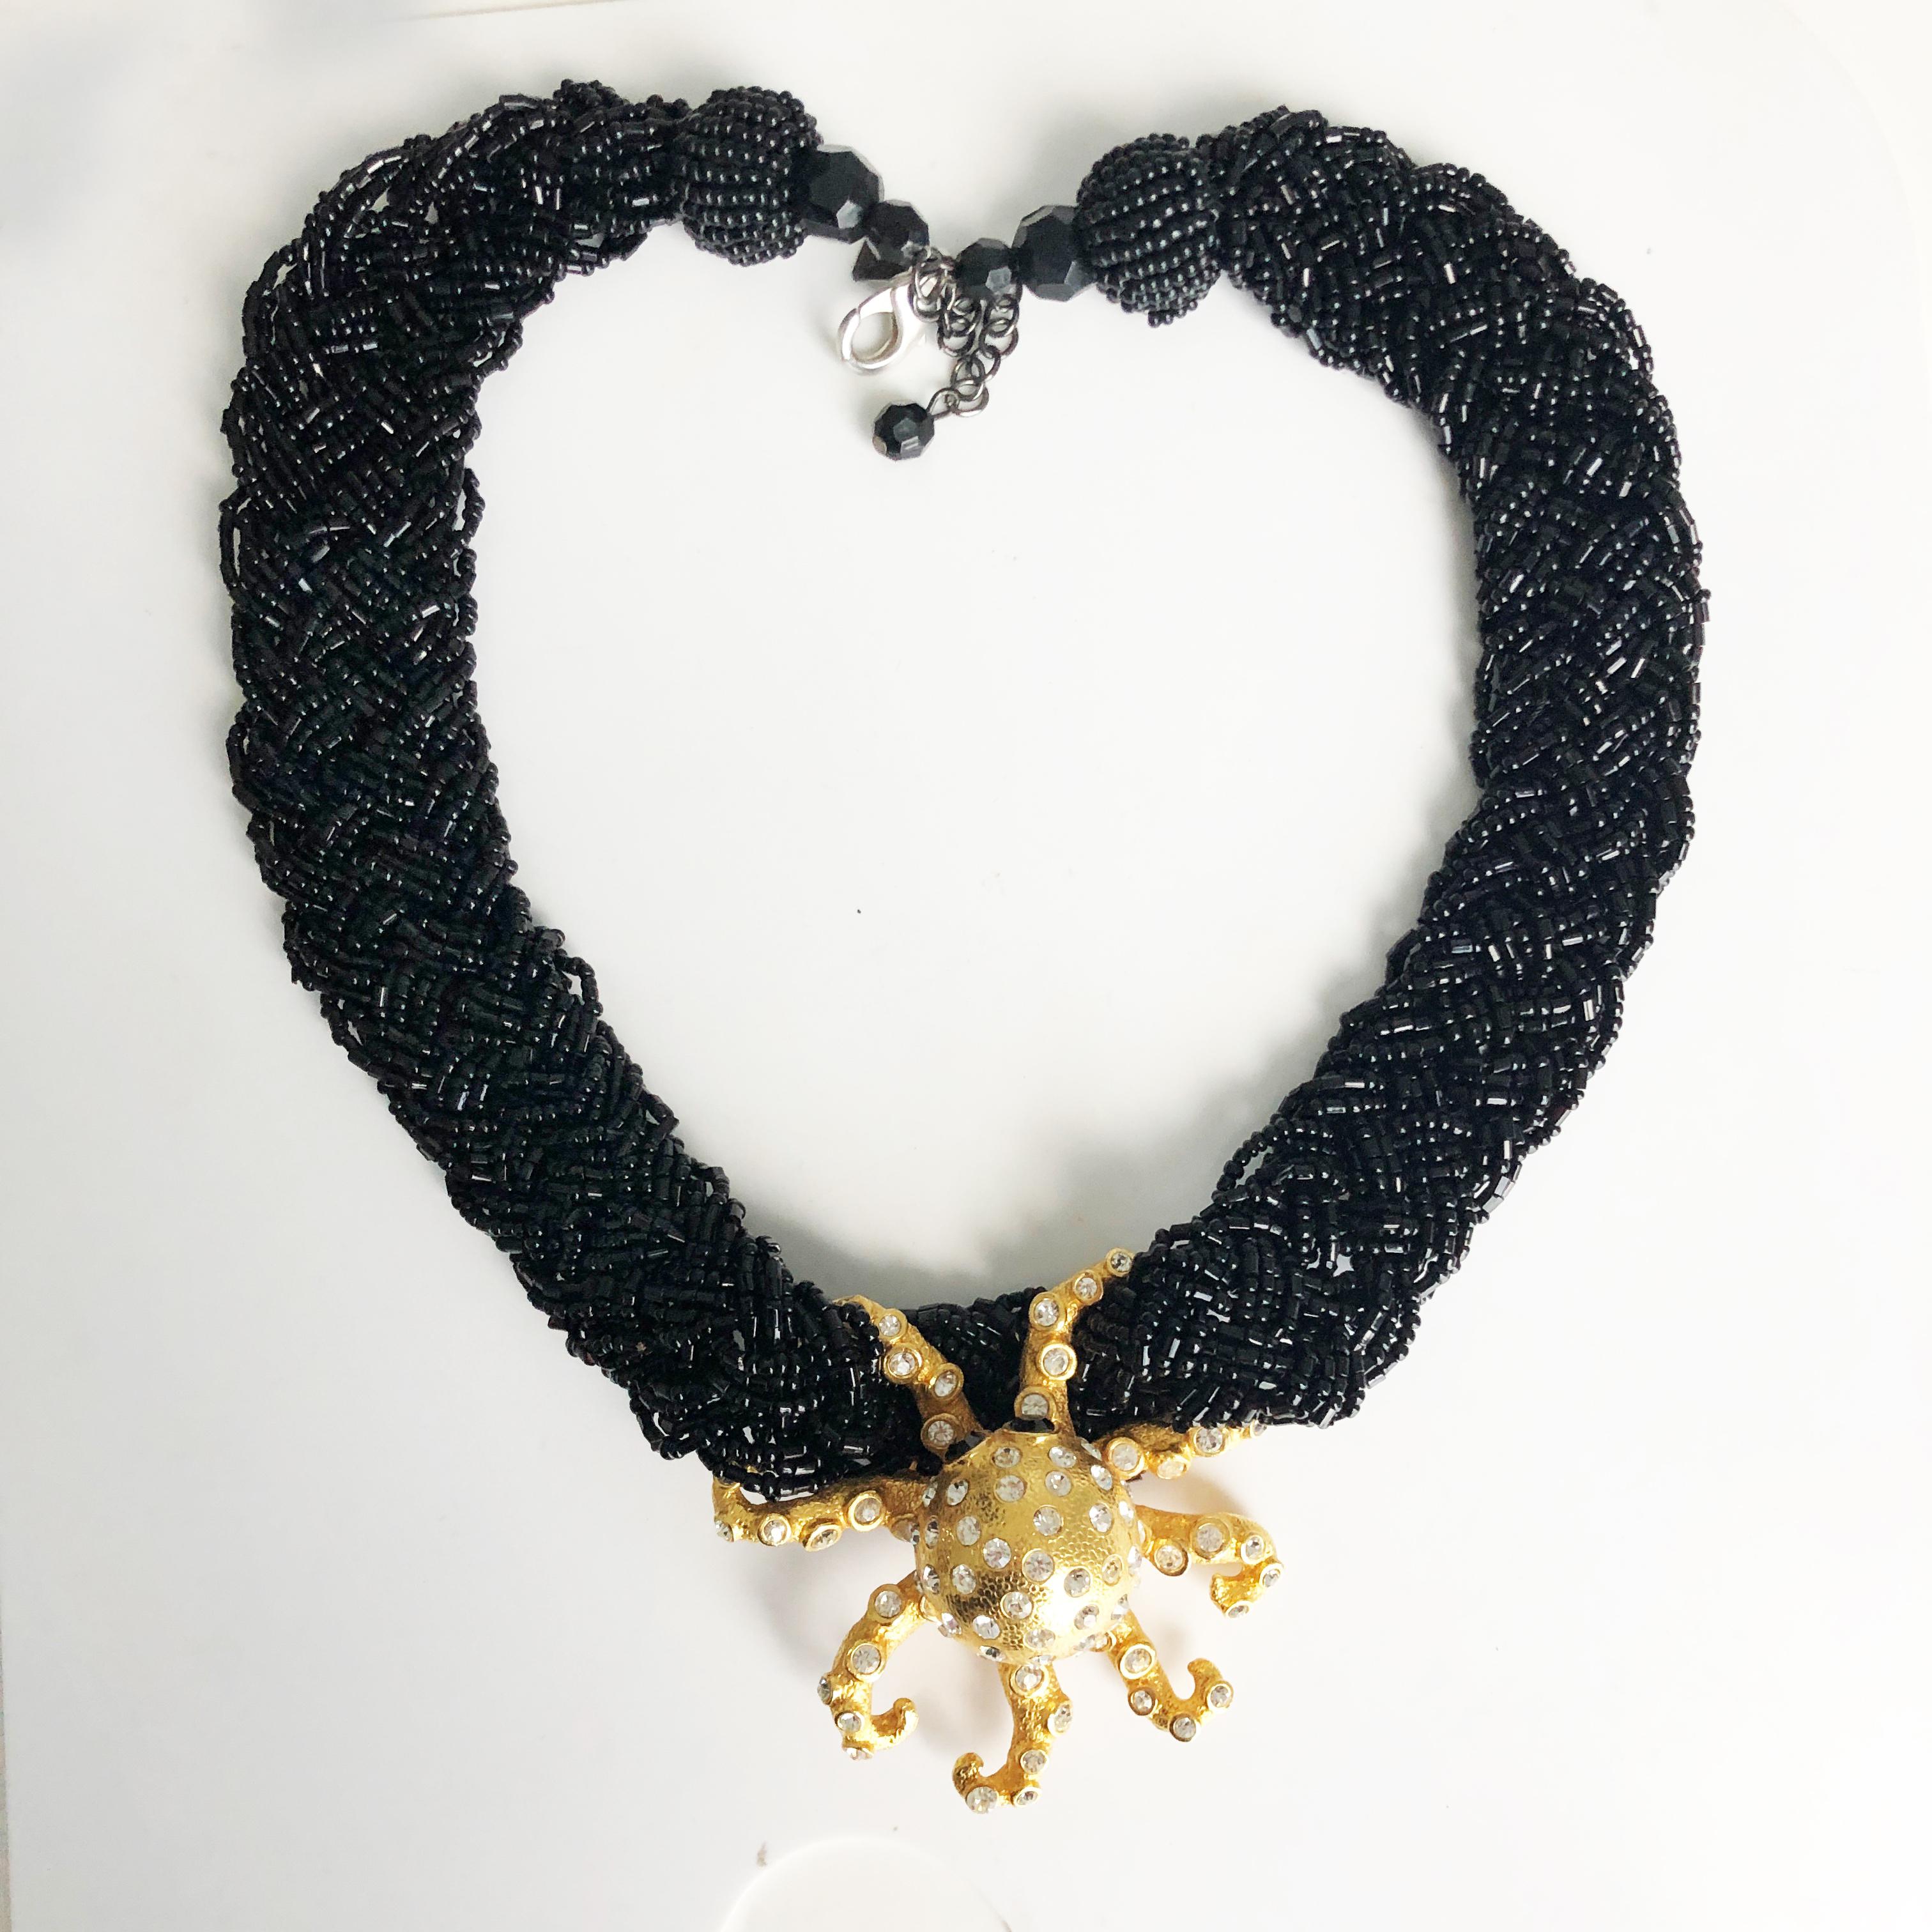 This one-of-a-kind piece was created by Stephanie Lake Design in 2013.  It features an antique, rhinestone-encrusted golden octopus set on a thick black jet bead braided chain.  

One of a kind, this is a spectacular piece, guaranteed to generate